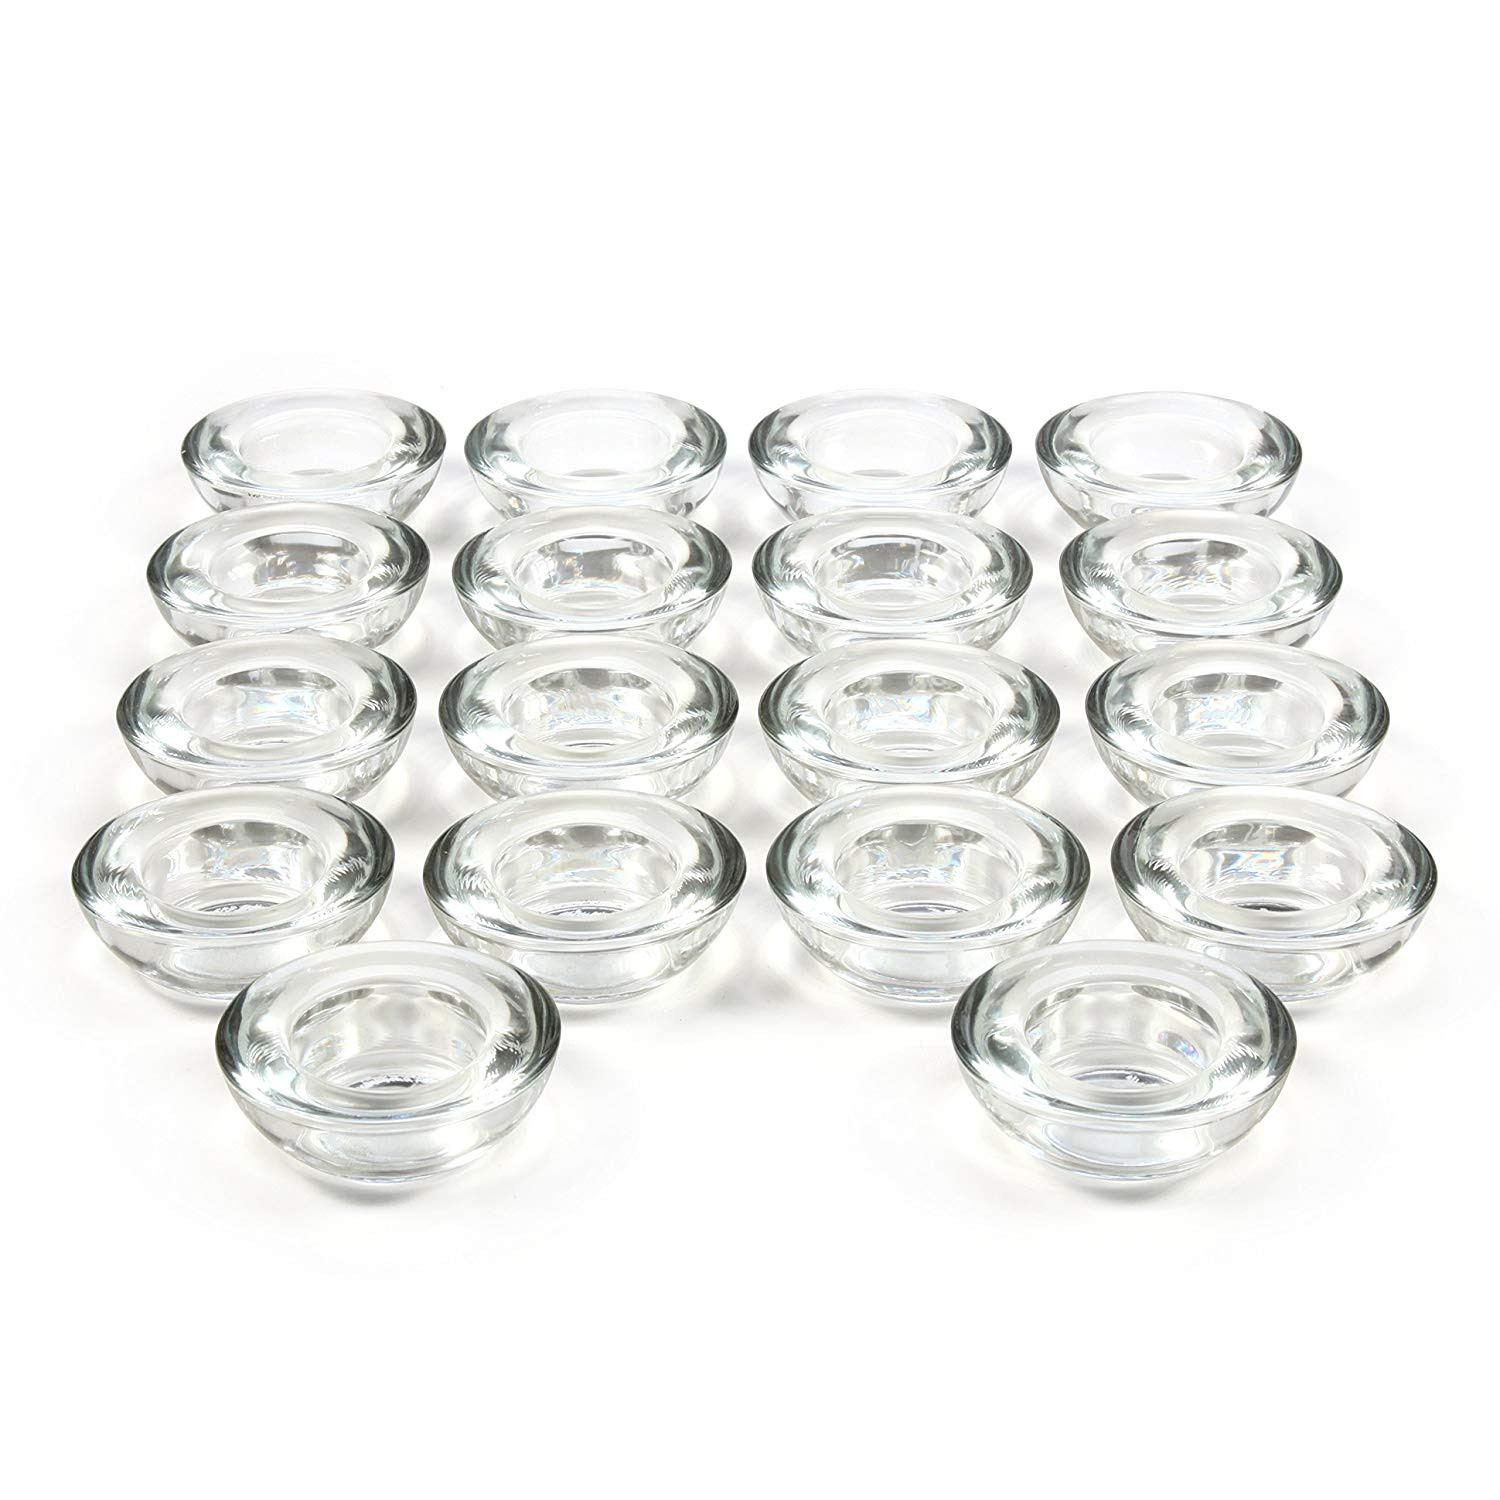 Tall Glass Candle Vases Of Amazon Com Hosley Set Of 18 Clear Glass Led Tea Light Holders 3 Regarding Amazon Com Hosley Set Of 18 Clear Glass Led Tea Light Holders 3 Diameter Ideal Gift for Weddings Party Spa Reiki Meditation Votive Candle Gardens